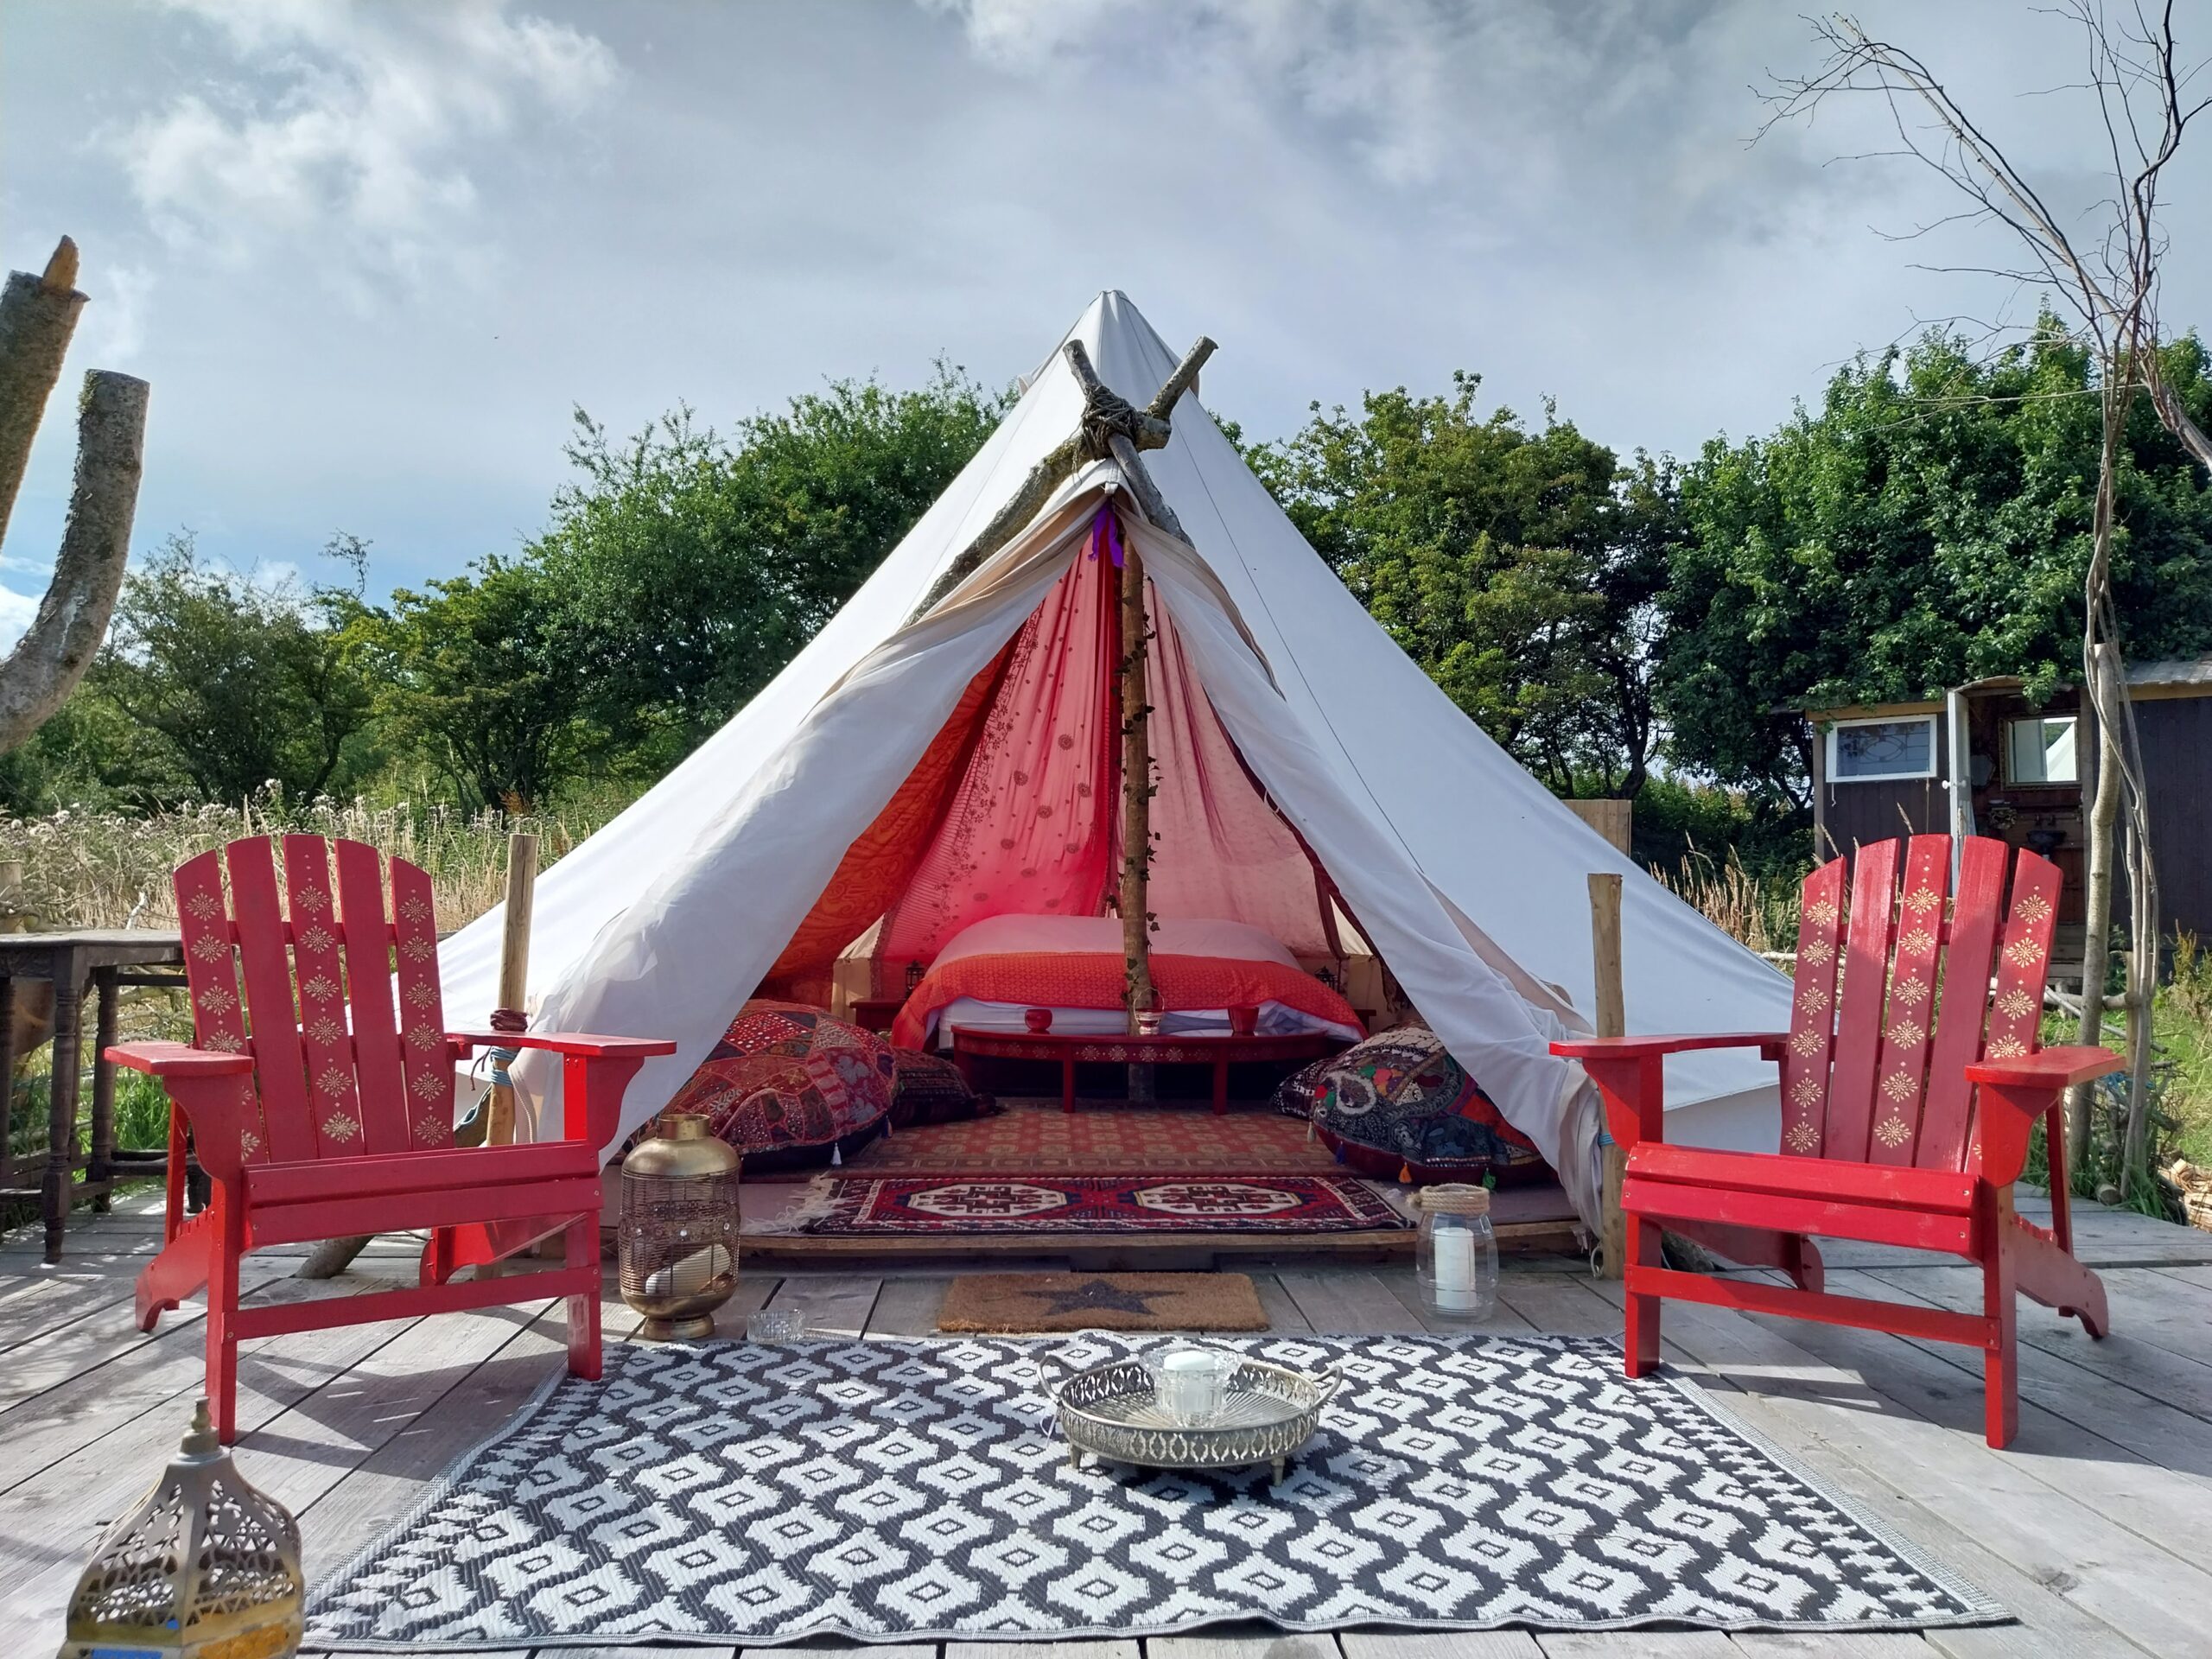 The Outpost glamping site